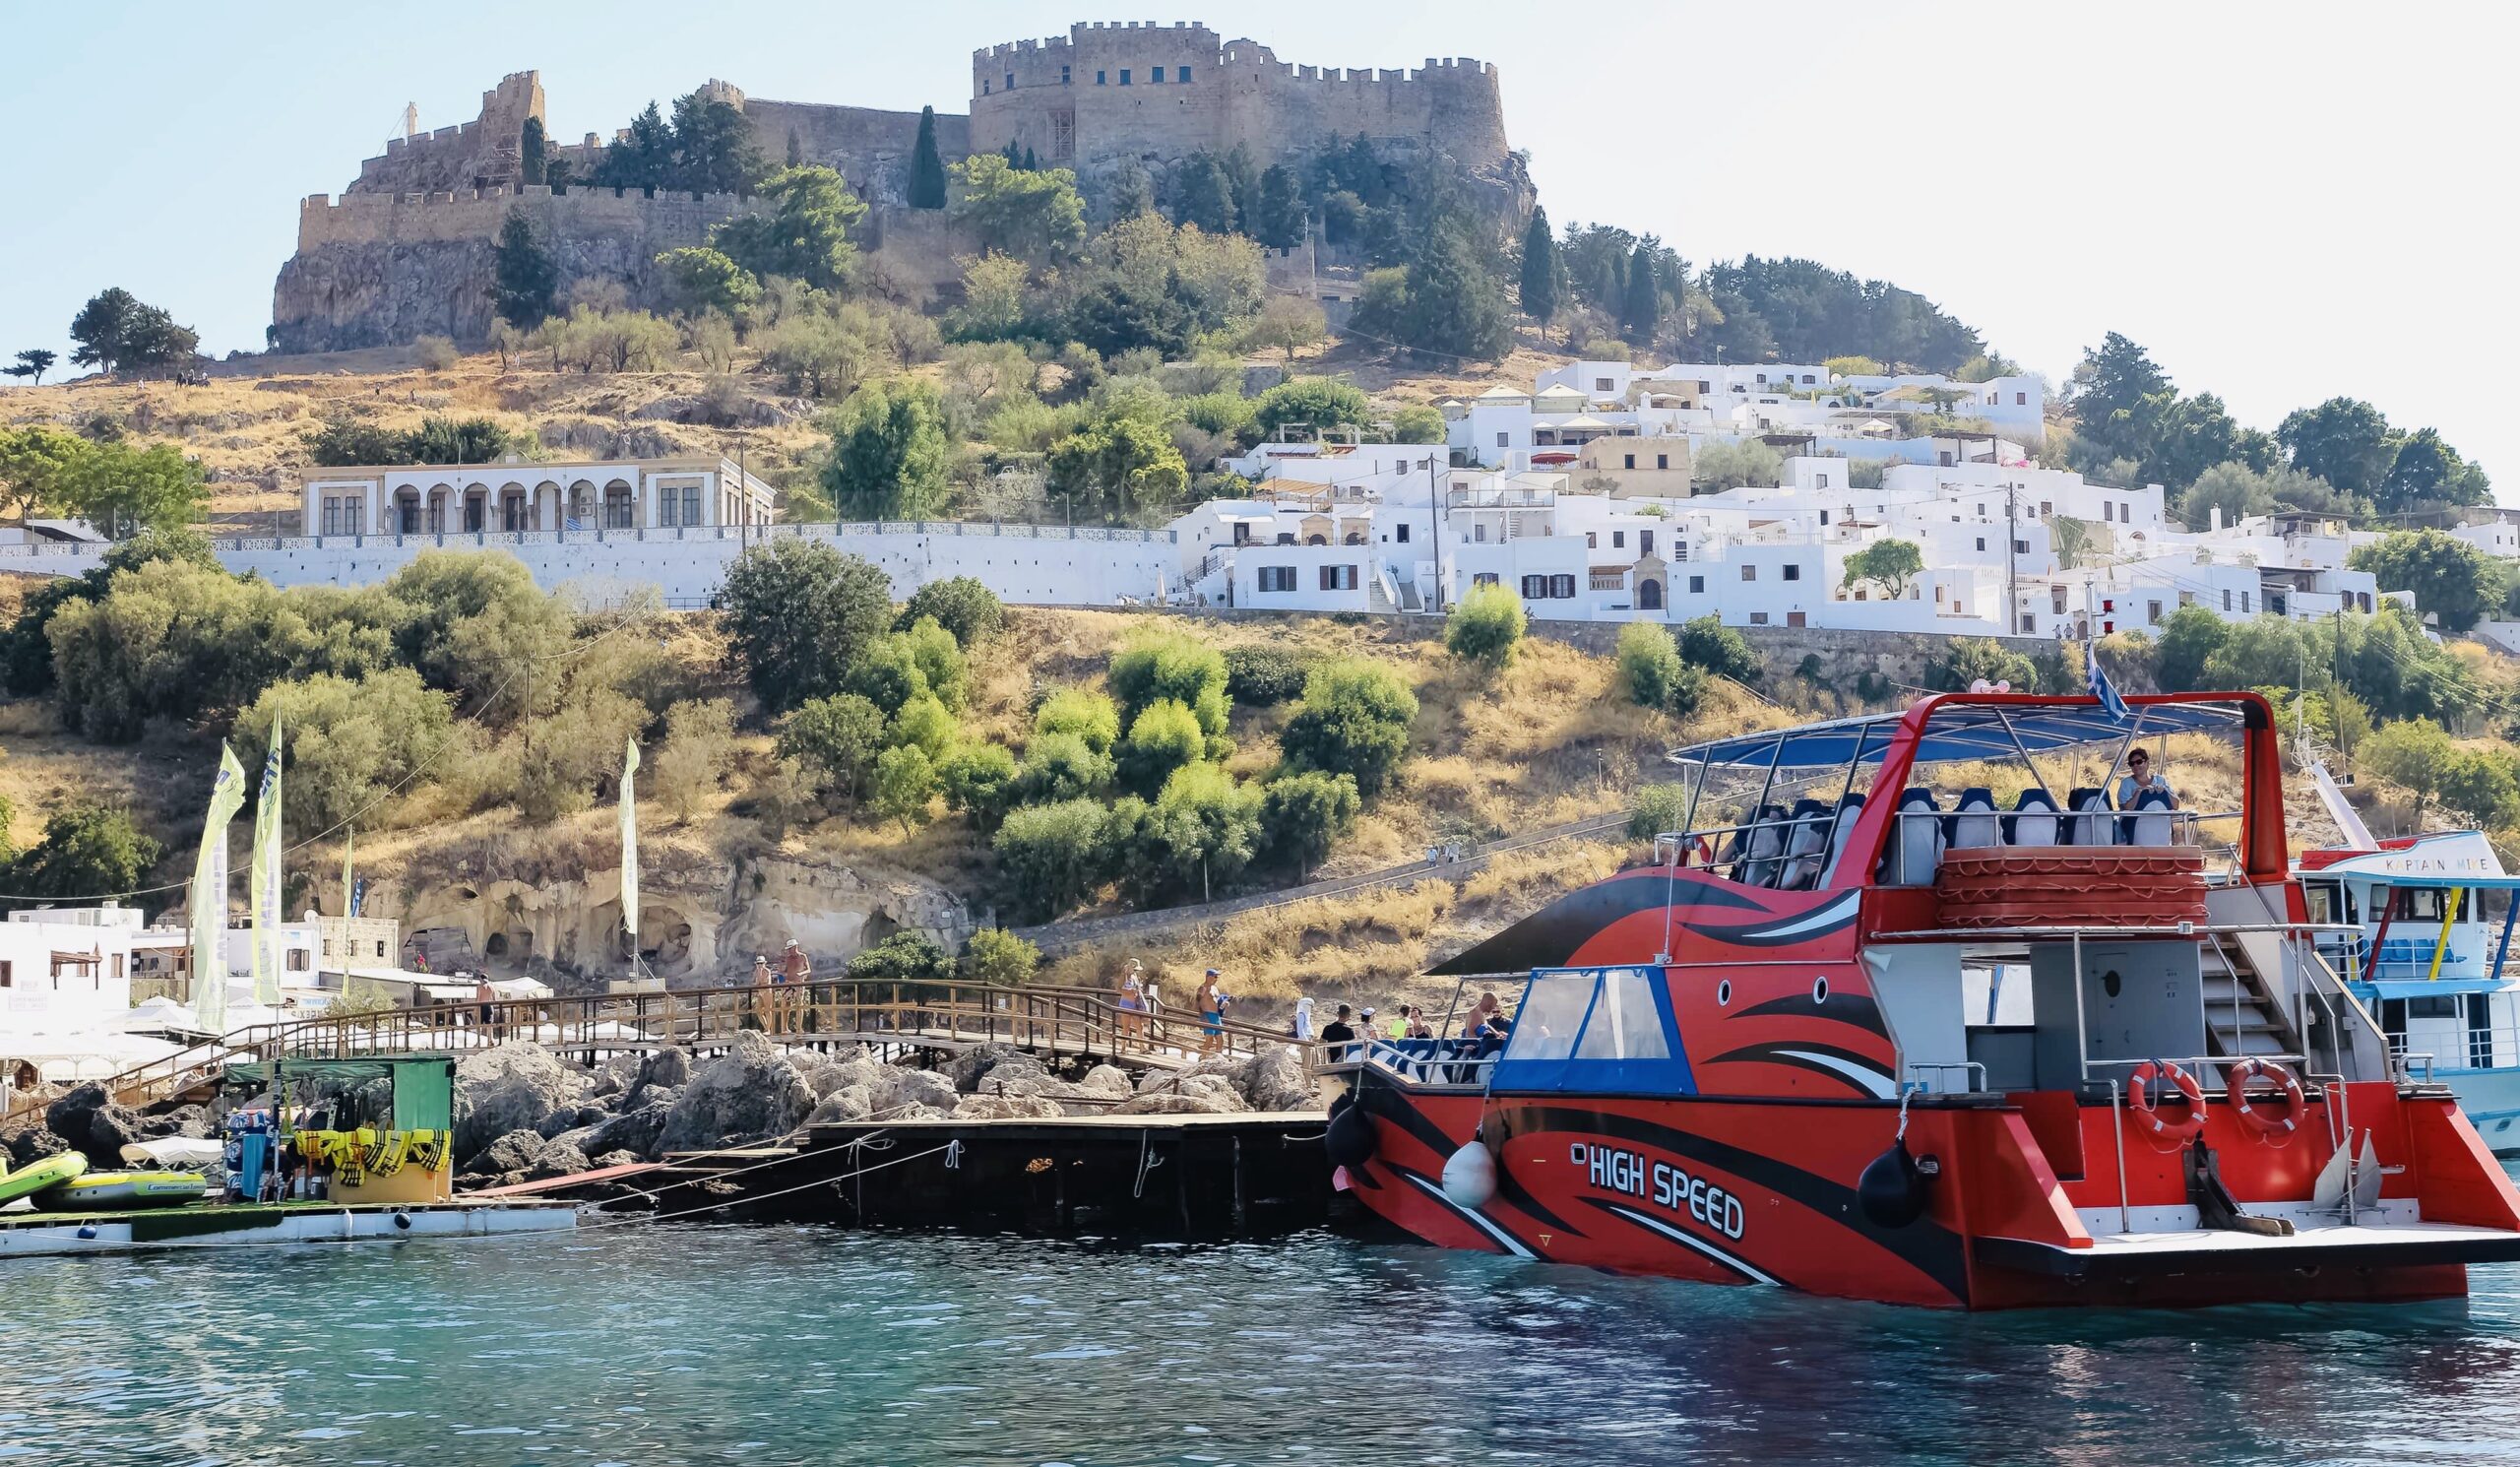 High Speed Boat to Lindos, dep. 11am